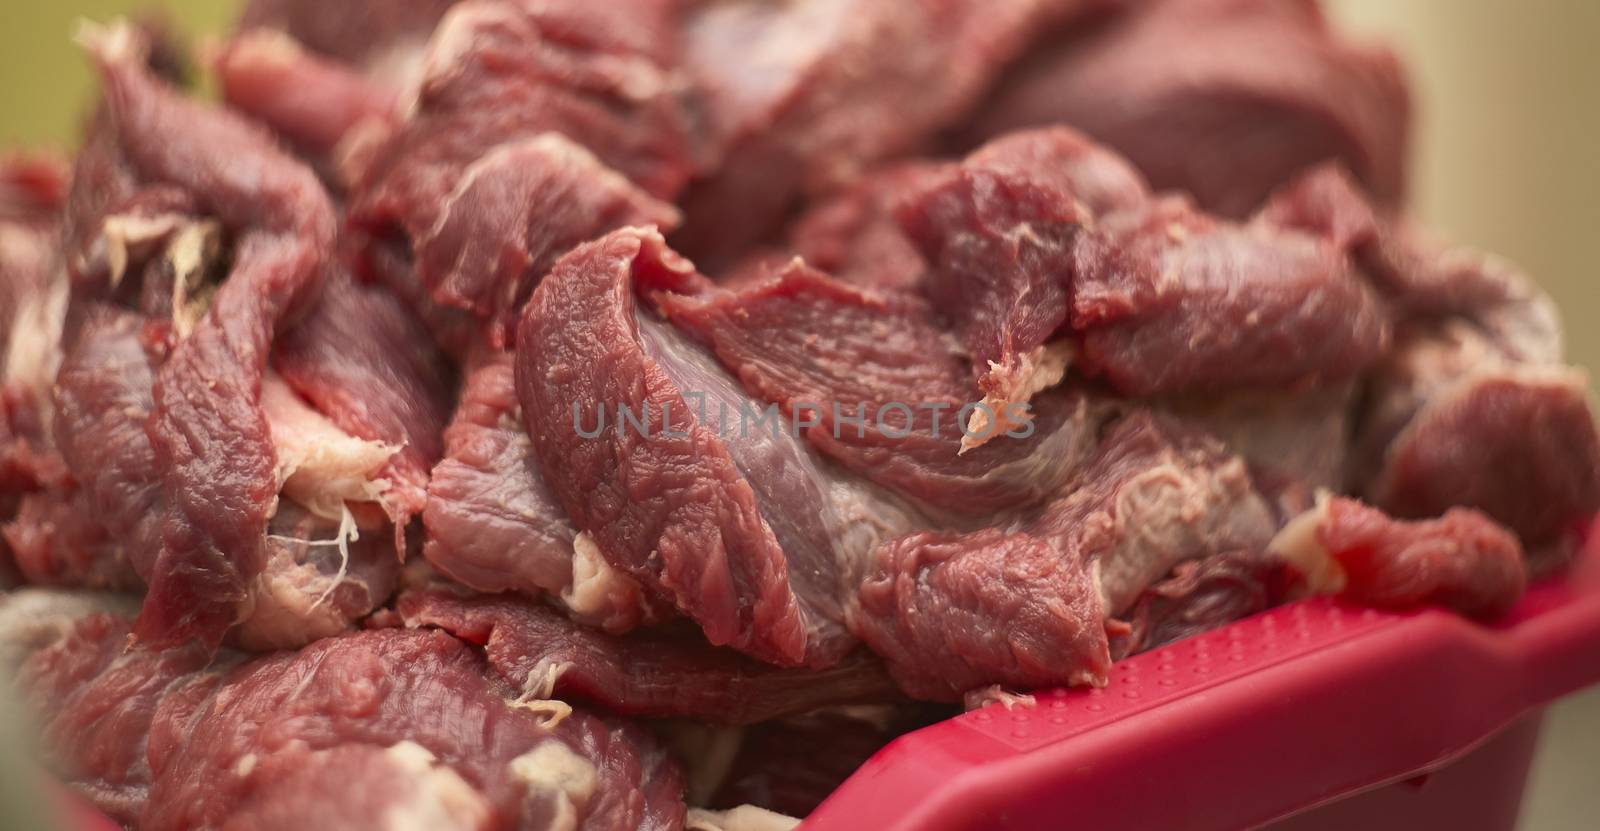 Detail of the fibers of a cut of veal with macro shot made in a butcher shop. Red meat from organic farming.